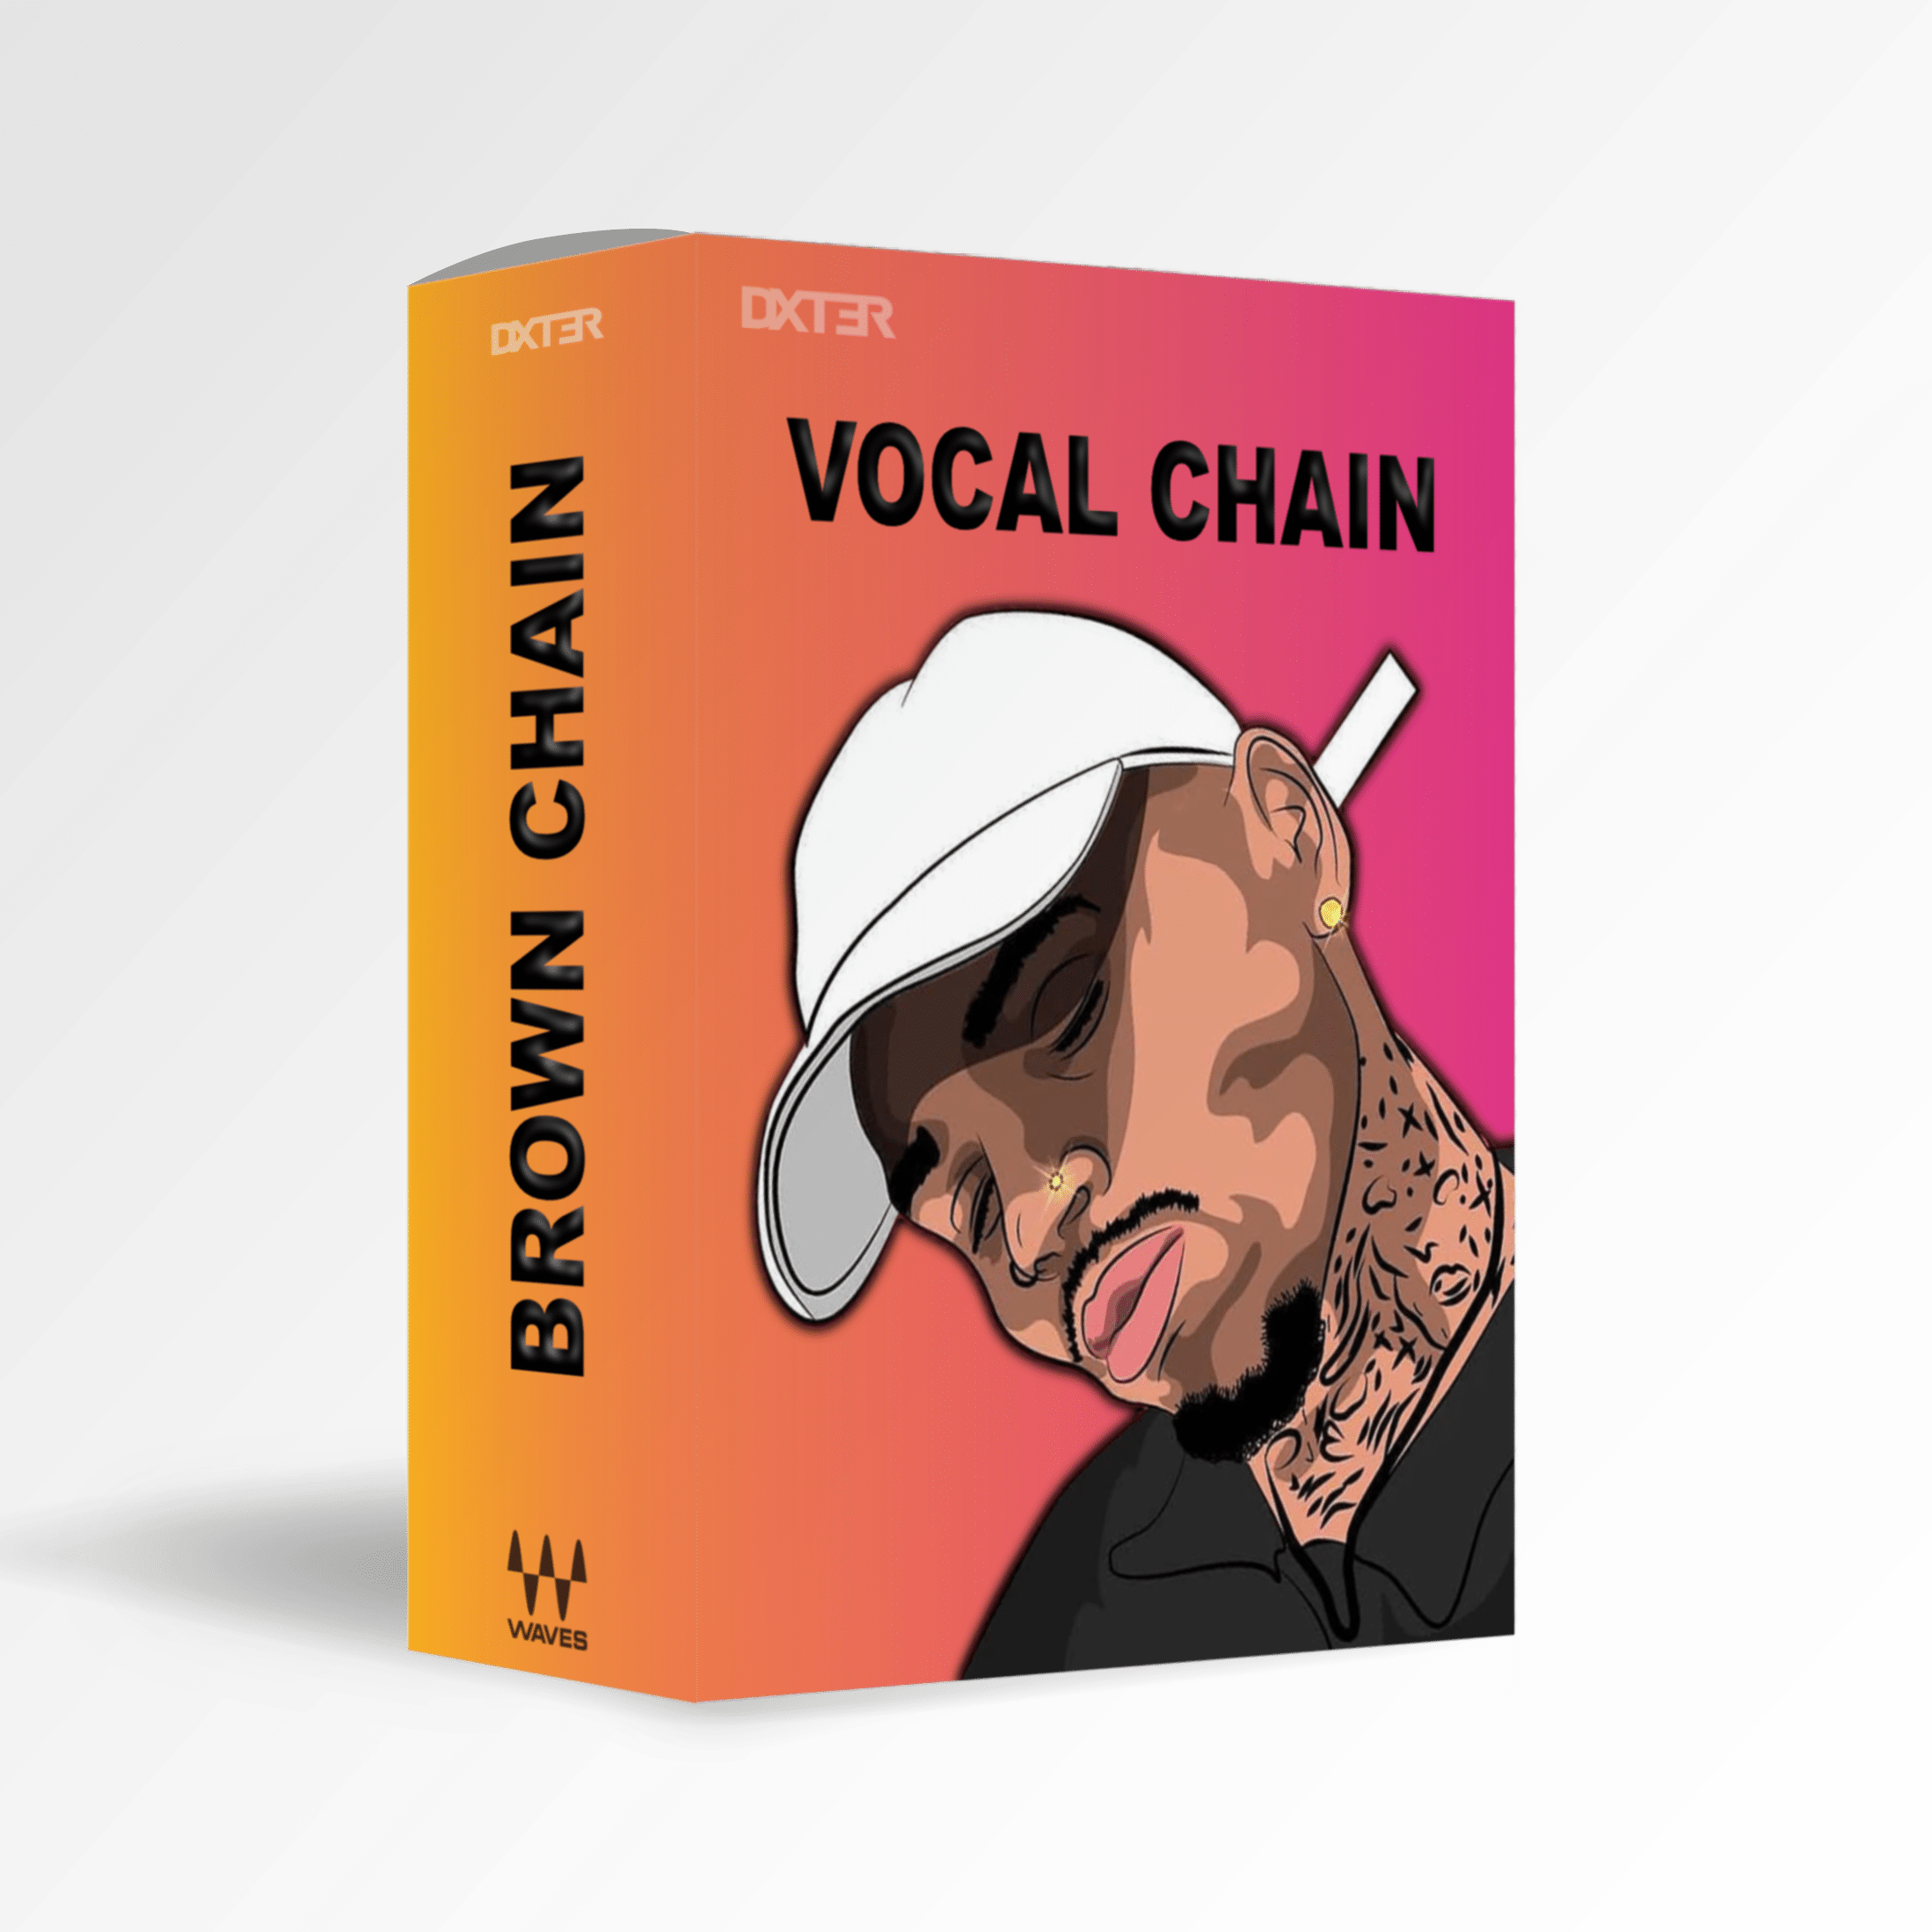 Chris Brown type Vocal Chain | DXT3R